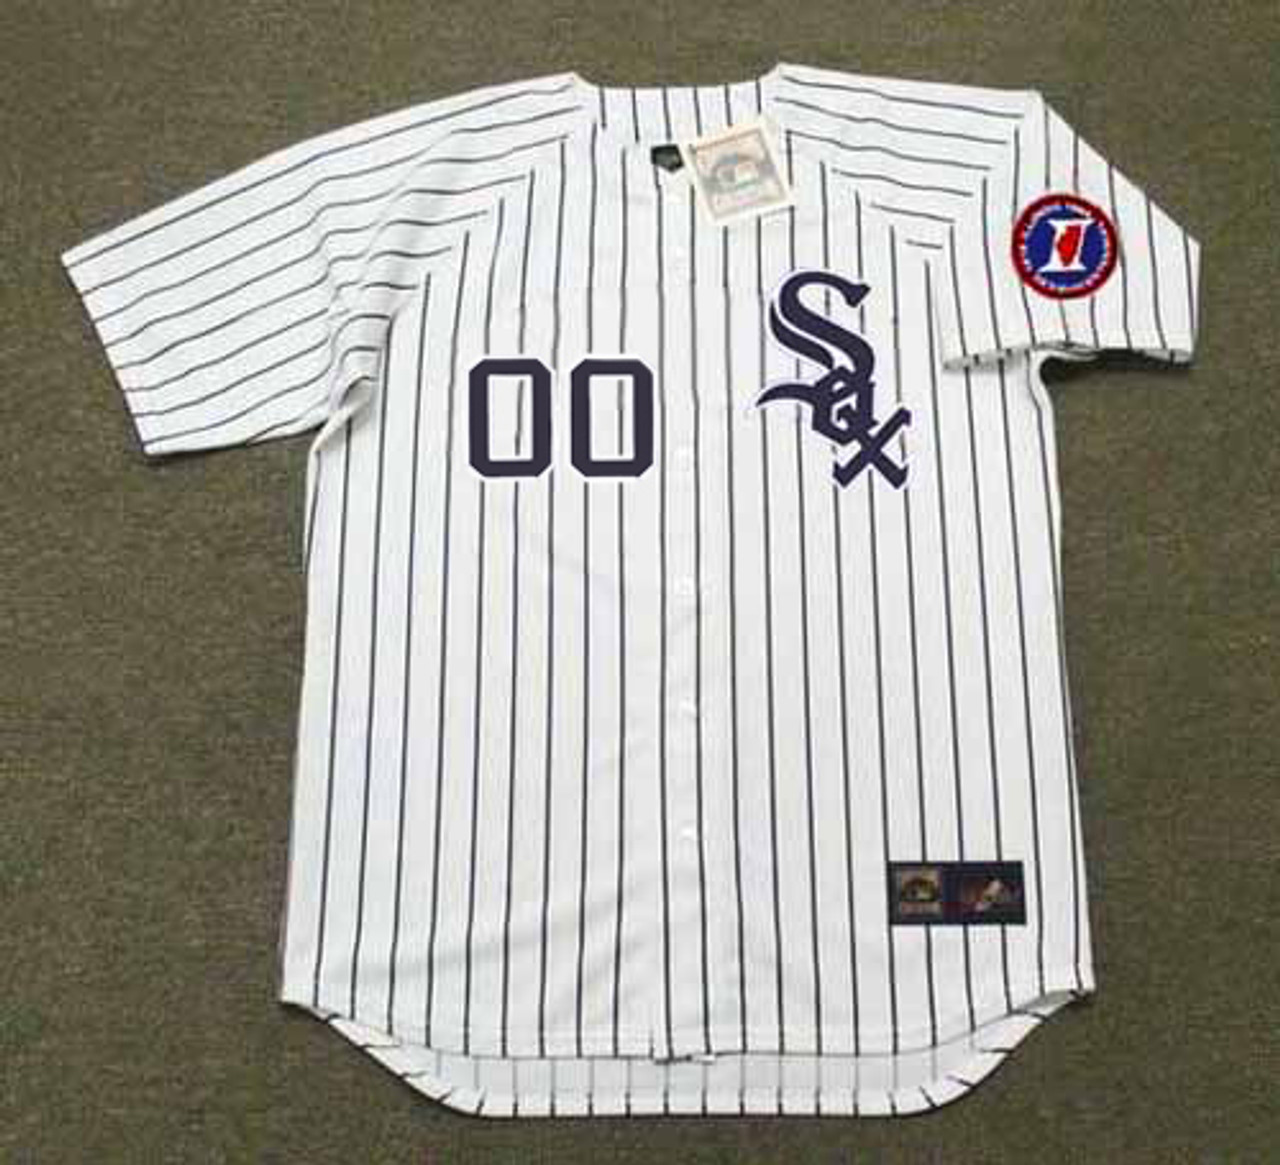 Chicago White Sox 1991 Majestic Throwback Alternate Jersey